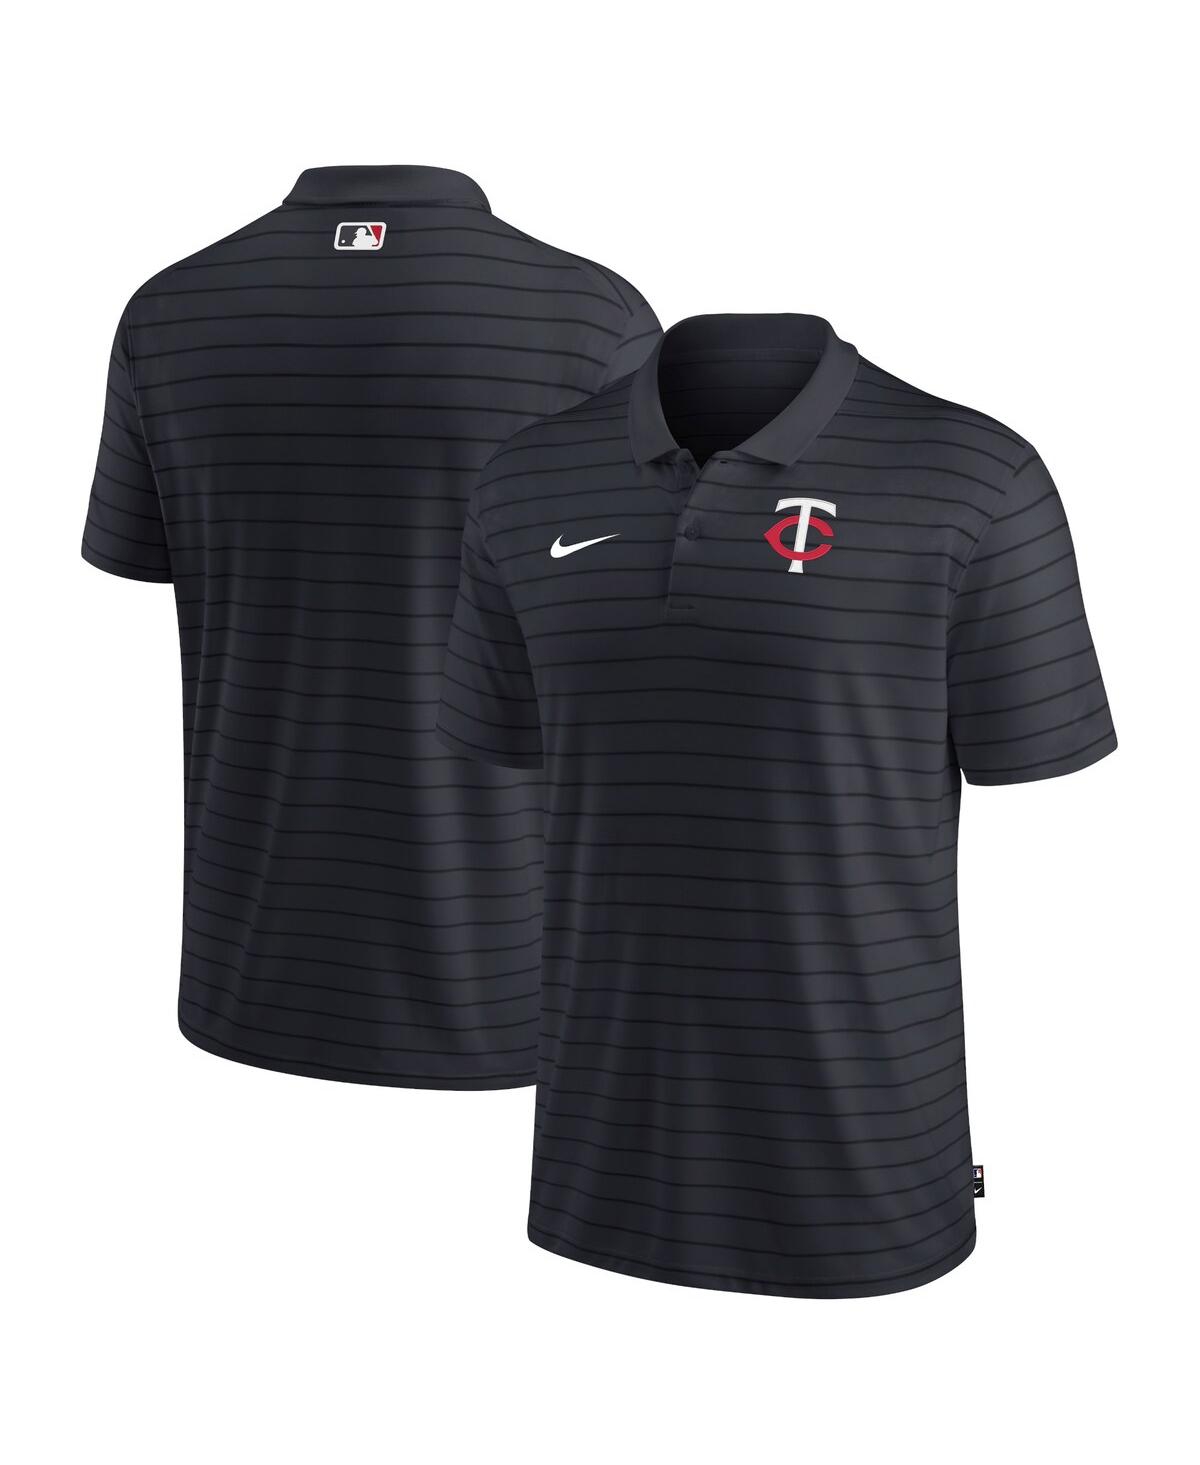 Men's Nike Minnesota Twins Navy Authentic Collection Victory Striped Performance Polo Shirt - Navy